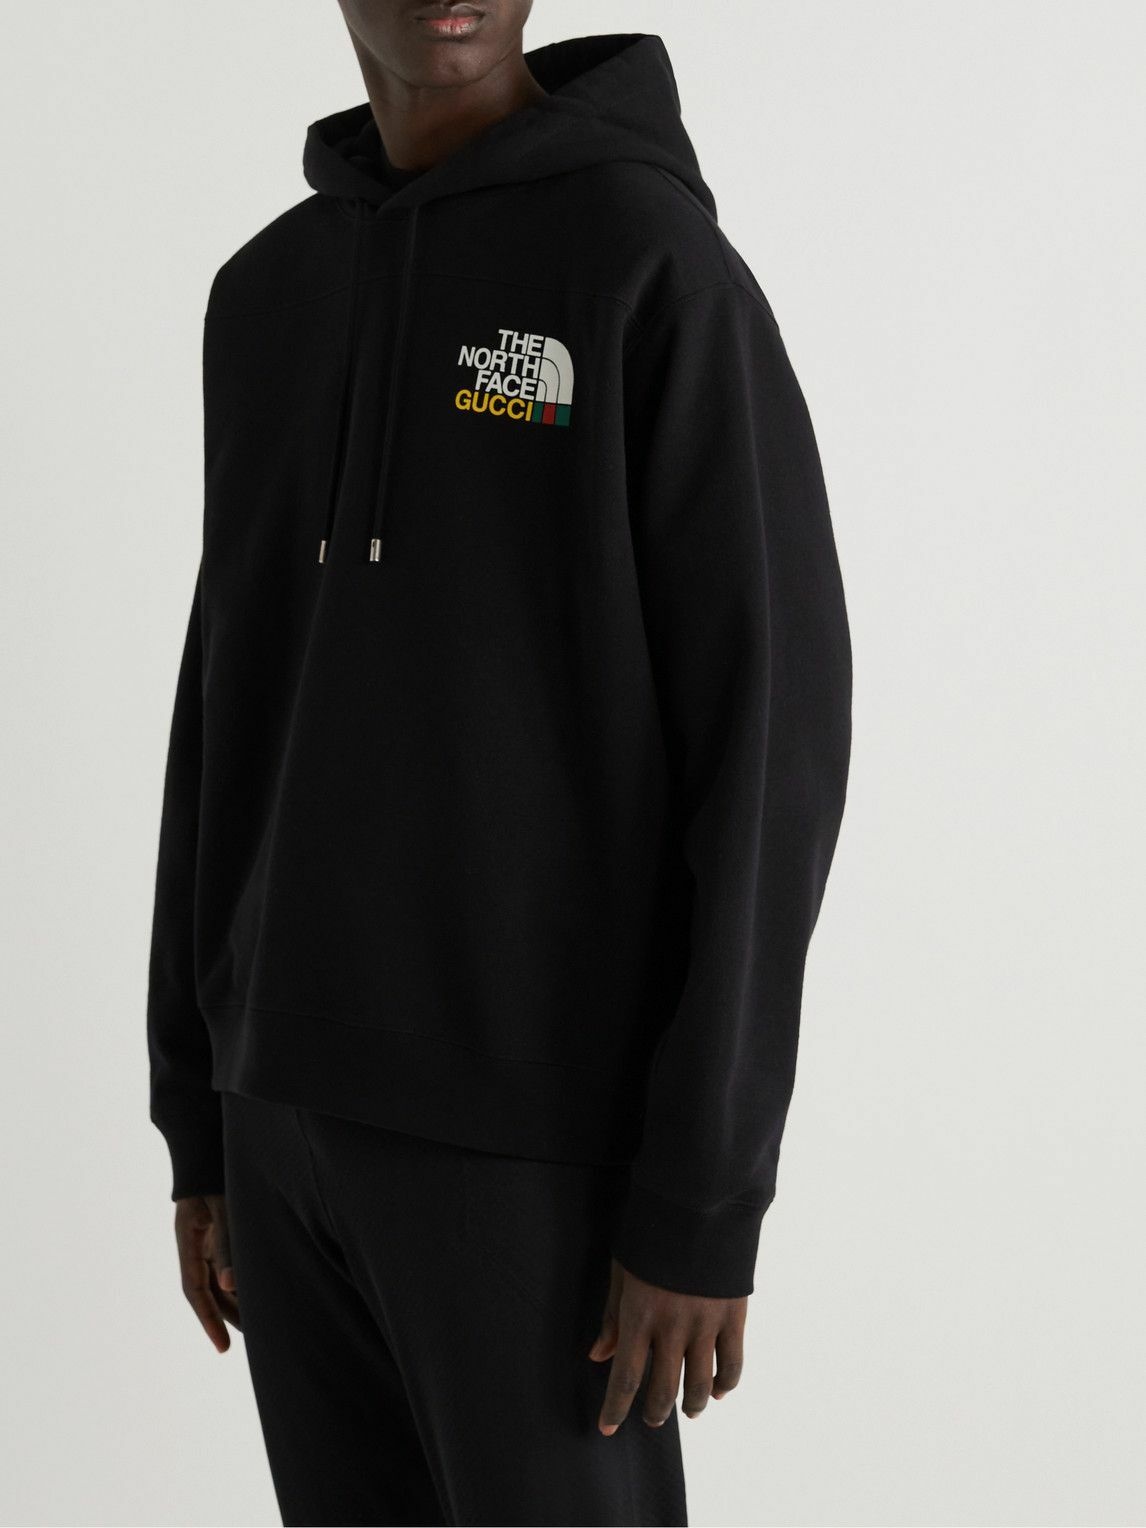 The North Face Logo Print Cotton Blend Hoodie Gray